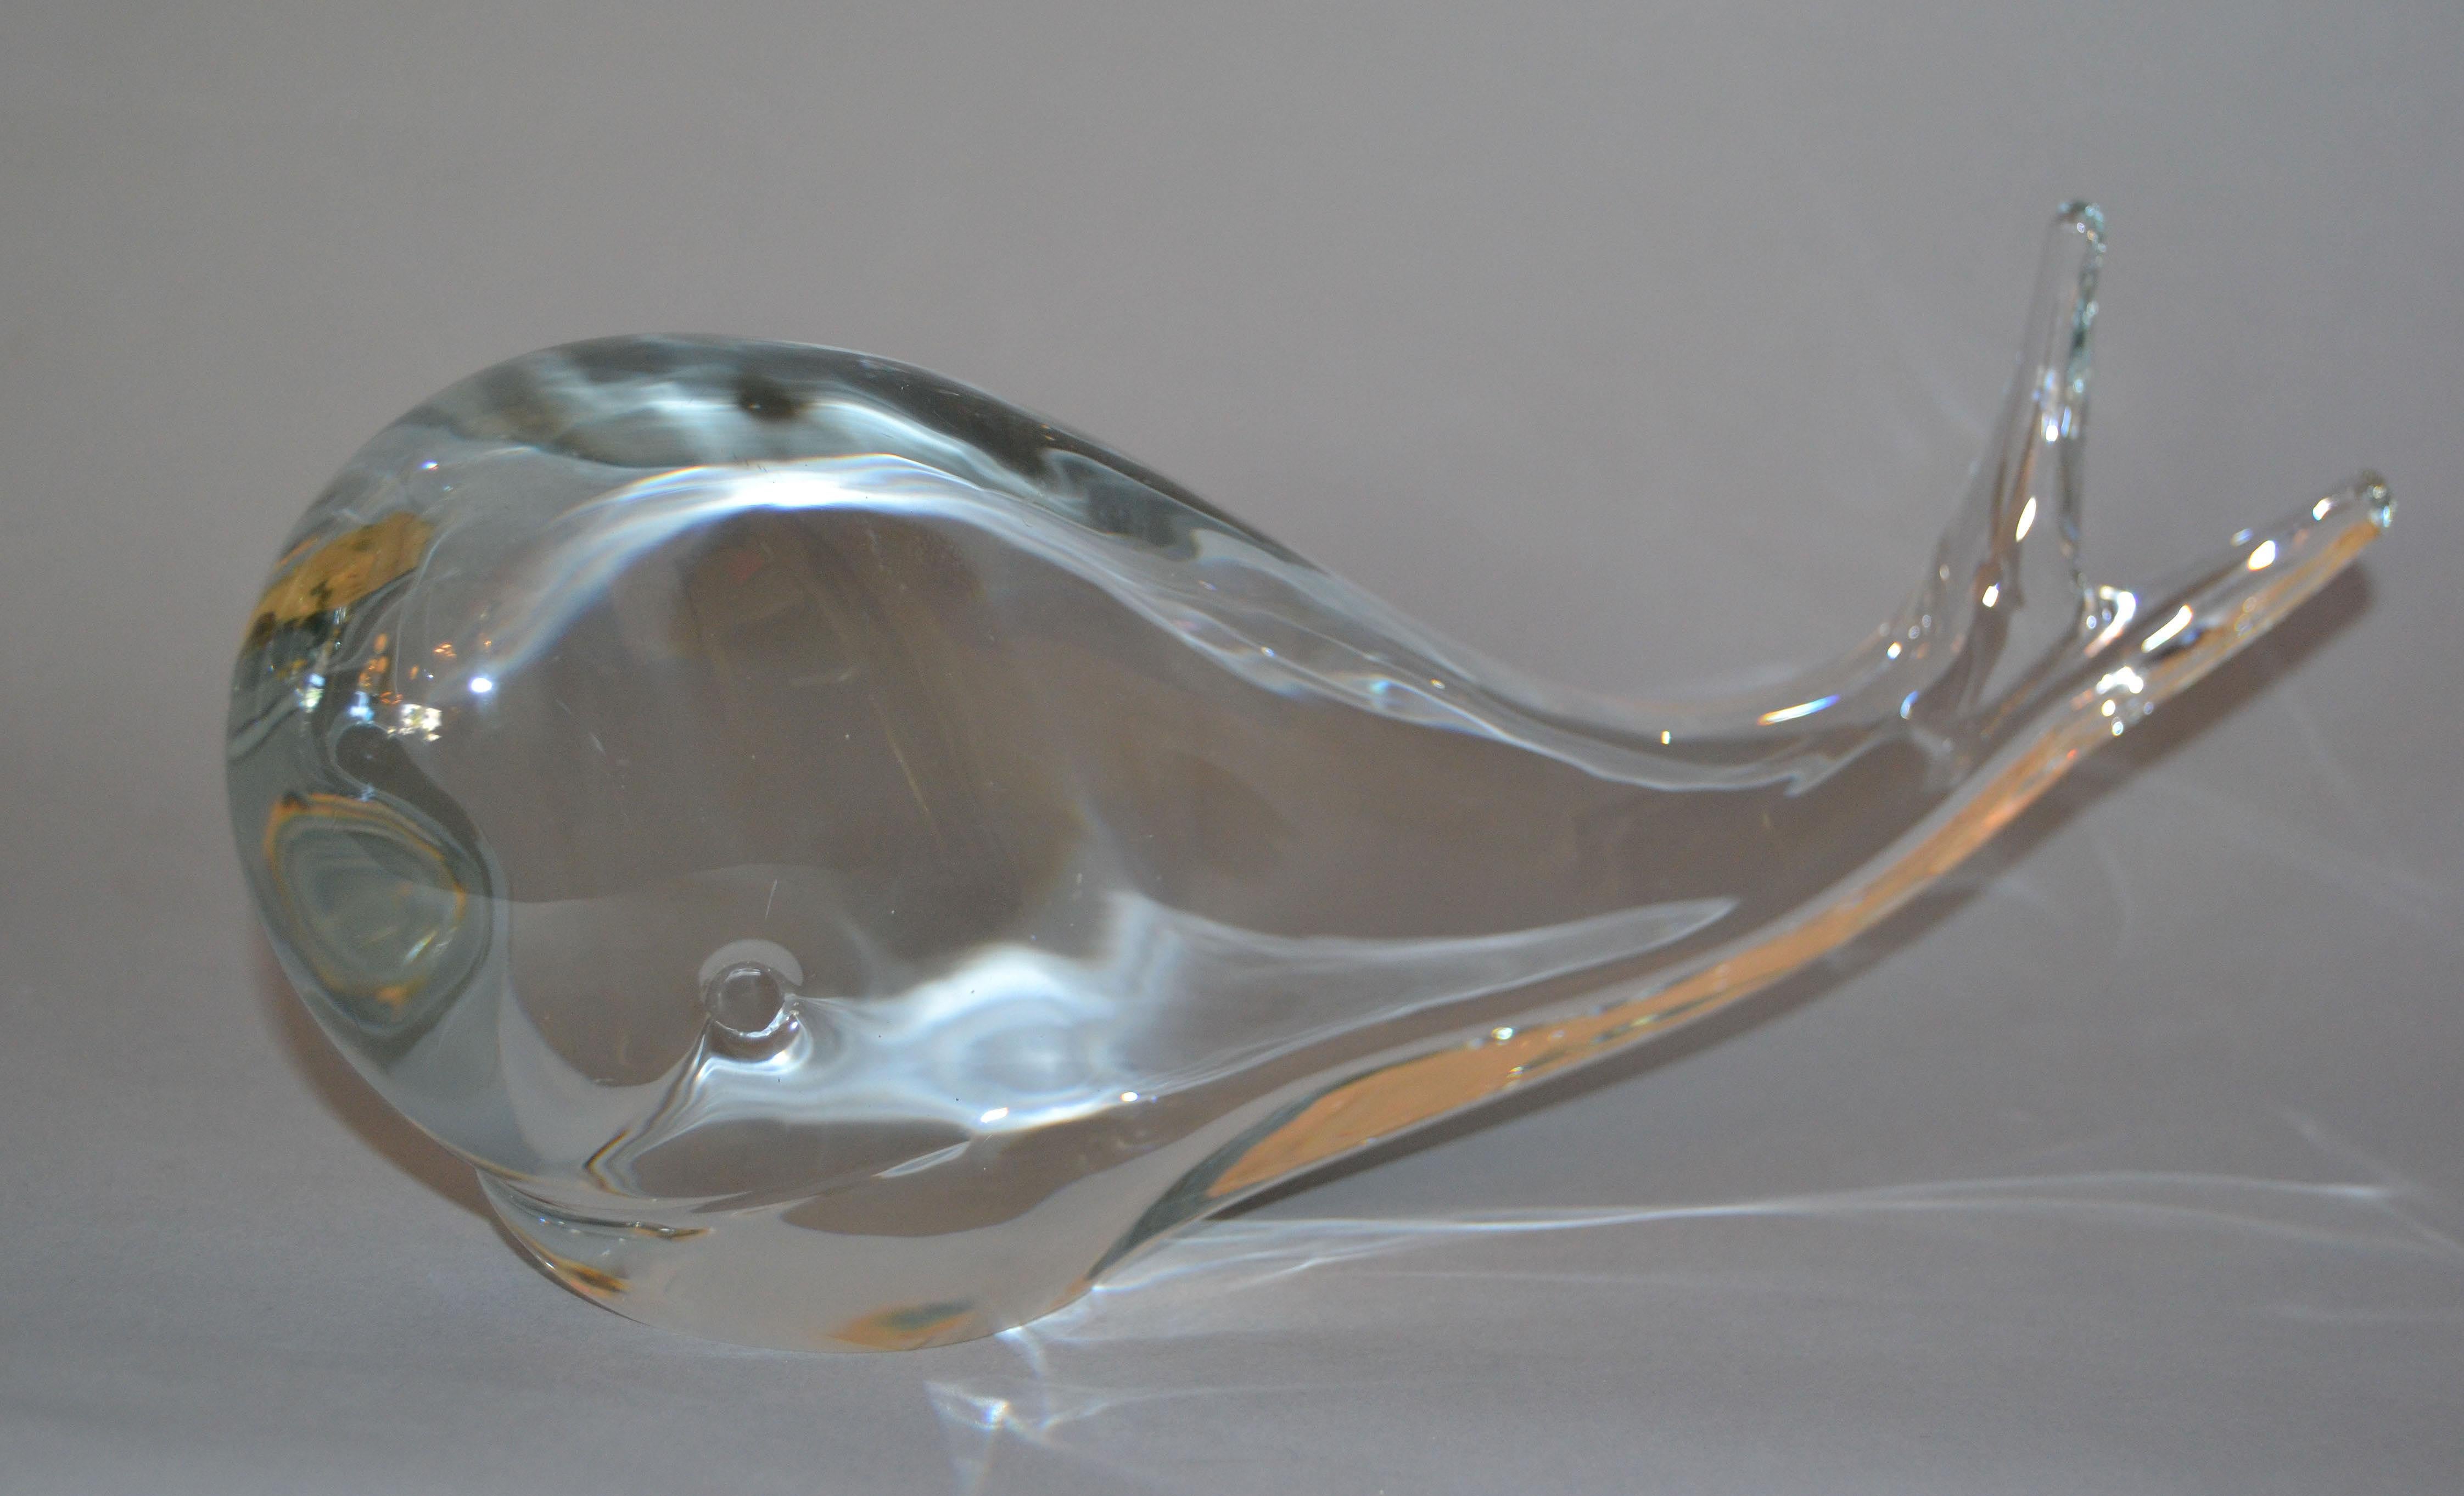 Mid-Century Modern crystal art glass whale by FM Ronneby Konstglas, Sweden.
Etched Markings on the bottom.
An amazing animal sculpture or a practical paperweight.